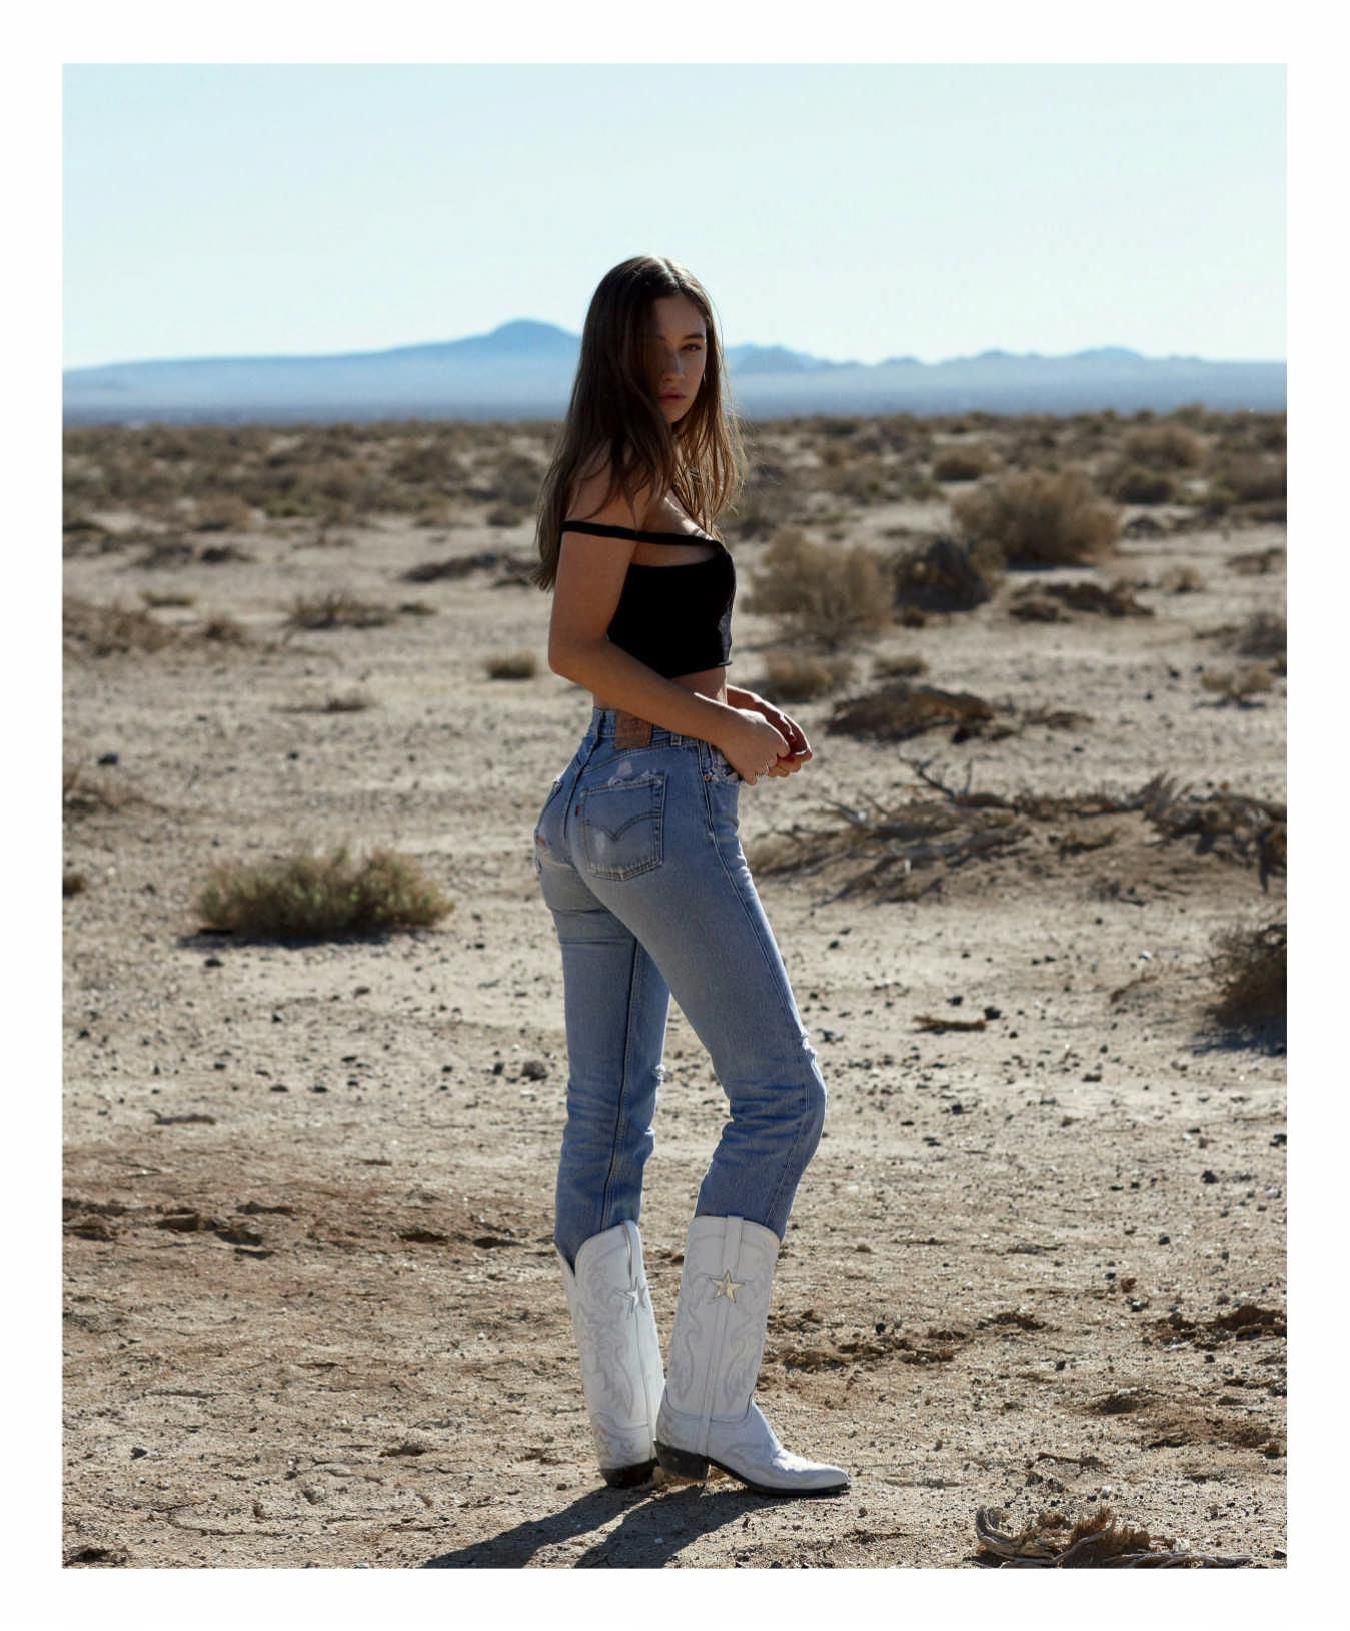 Elsie Hewitt Is The Hottest Hitchhiker Of 2017